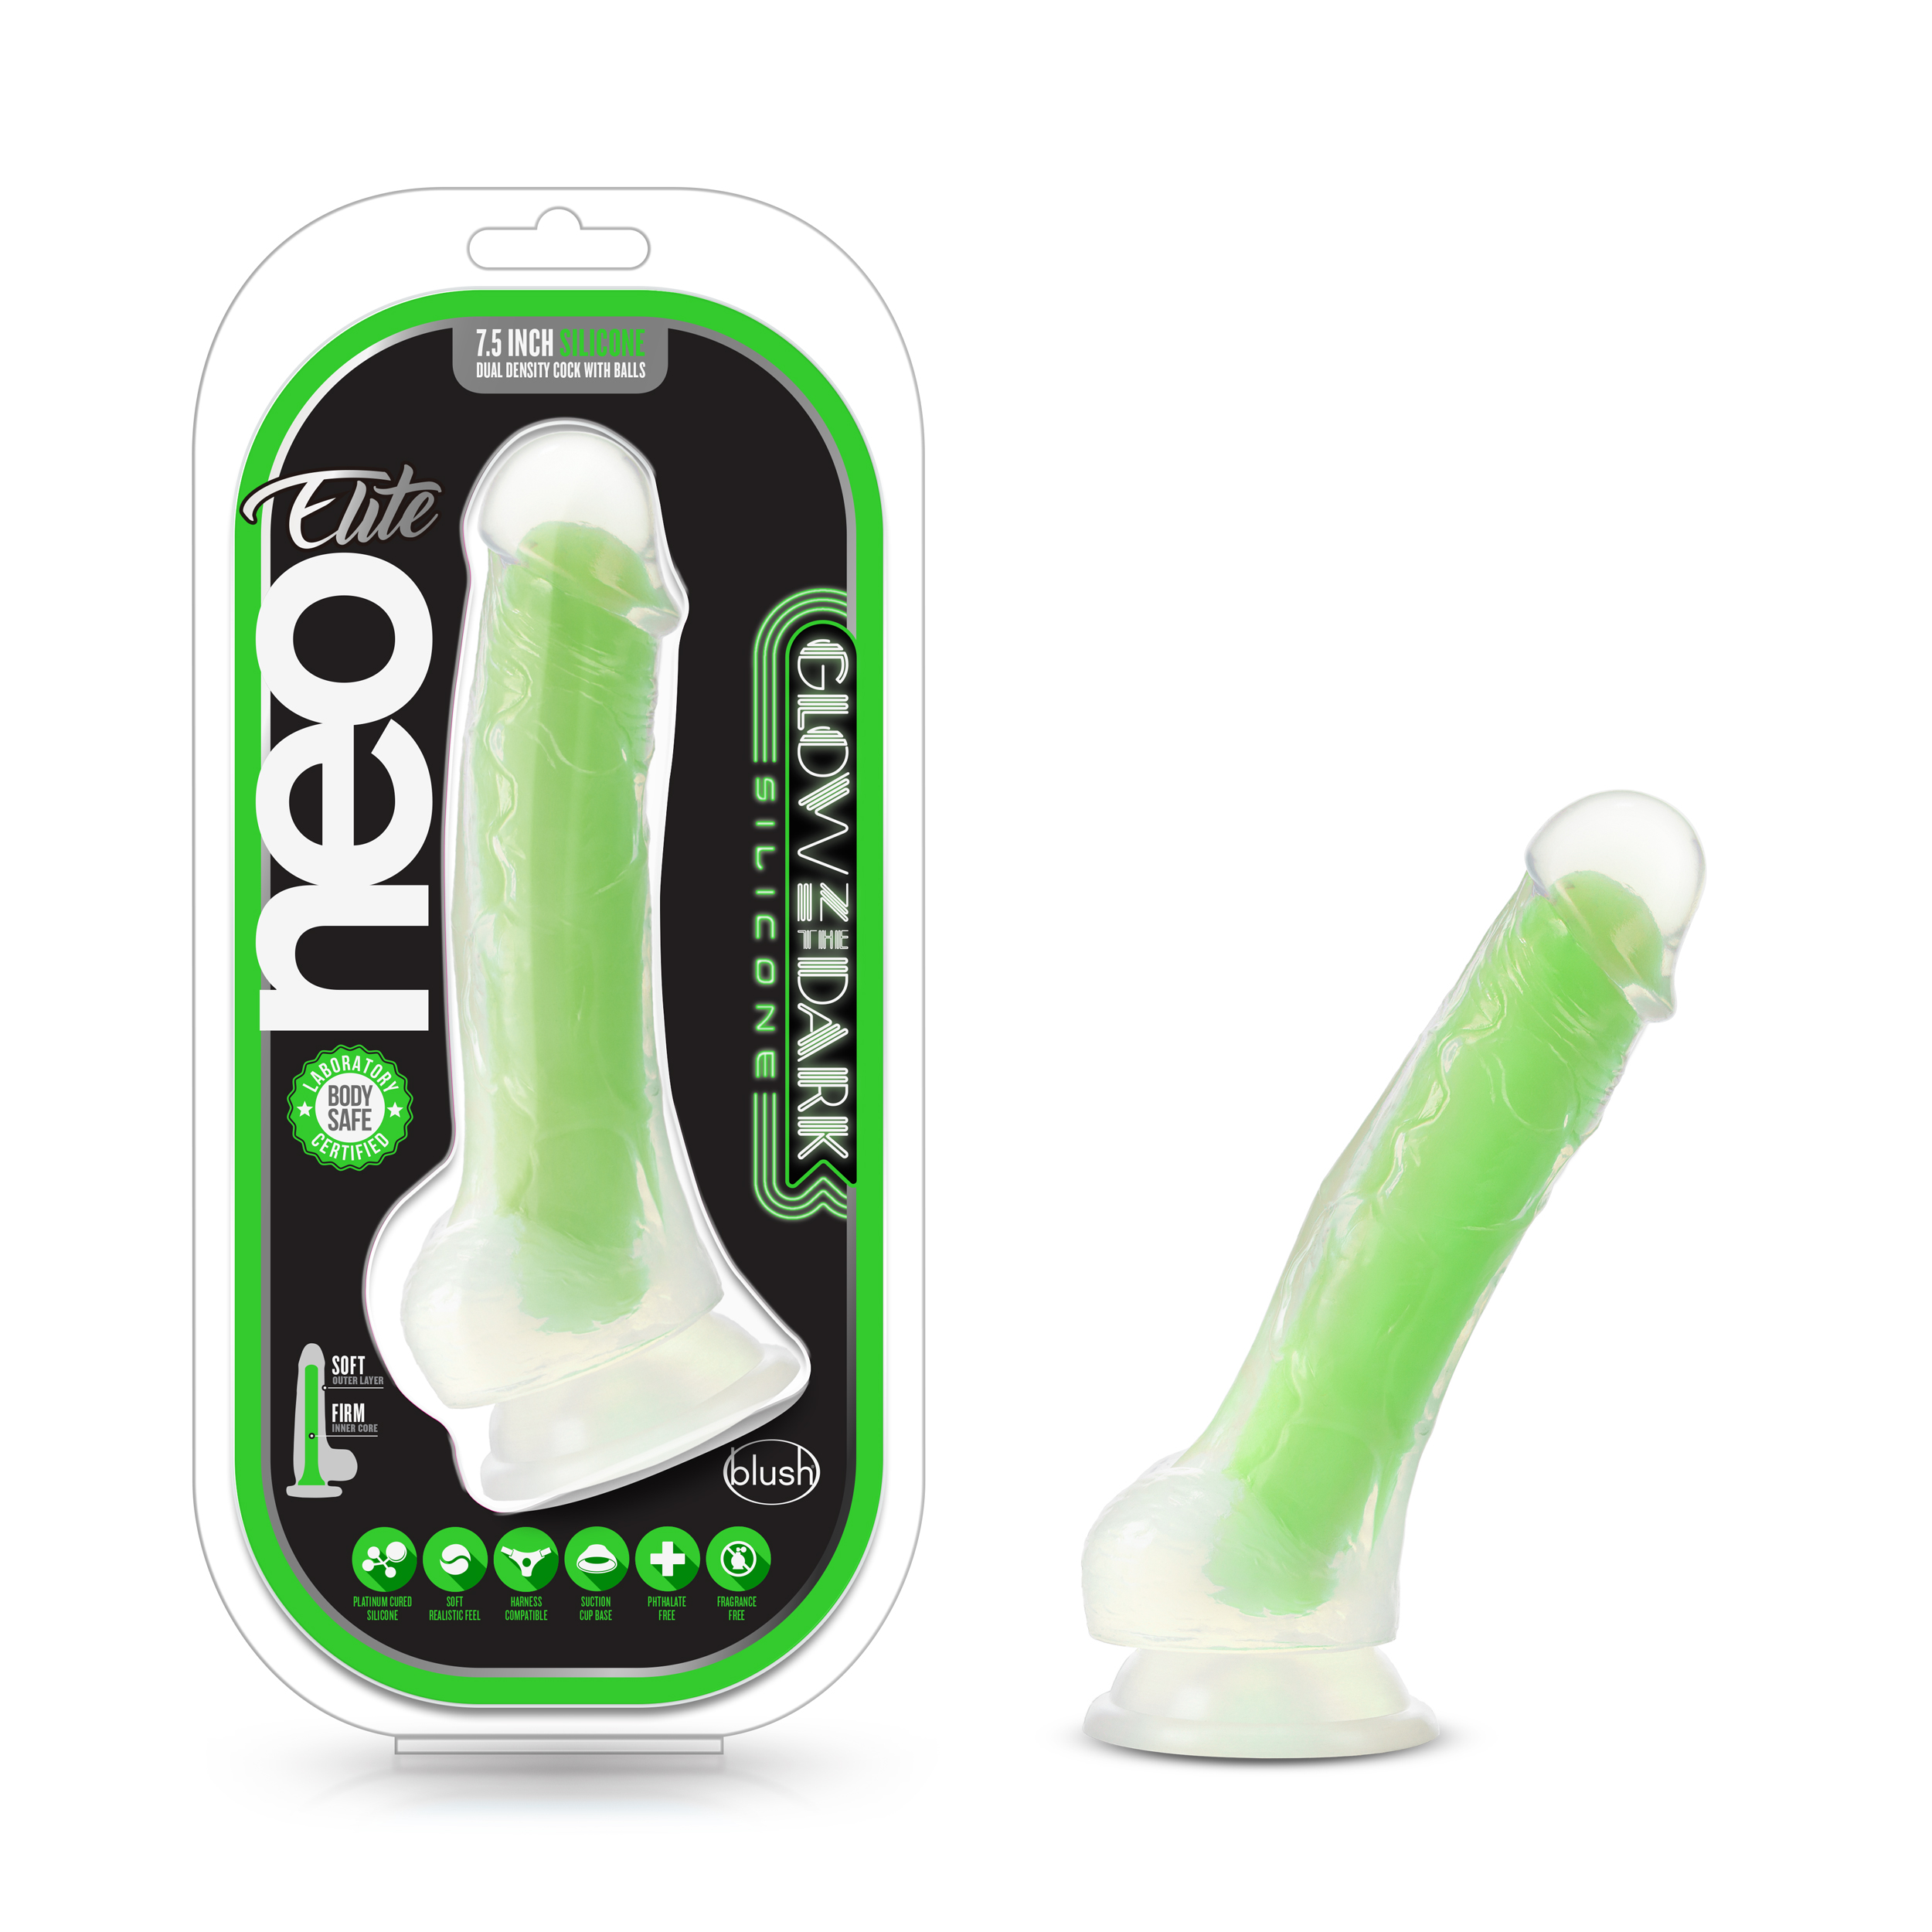 Neo Elite Glow In The Dark 7 5 Inch Silicone Dual